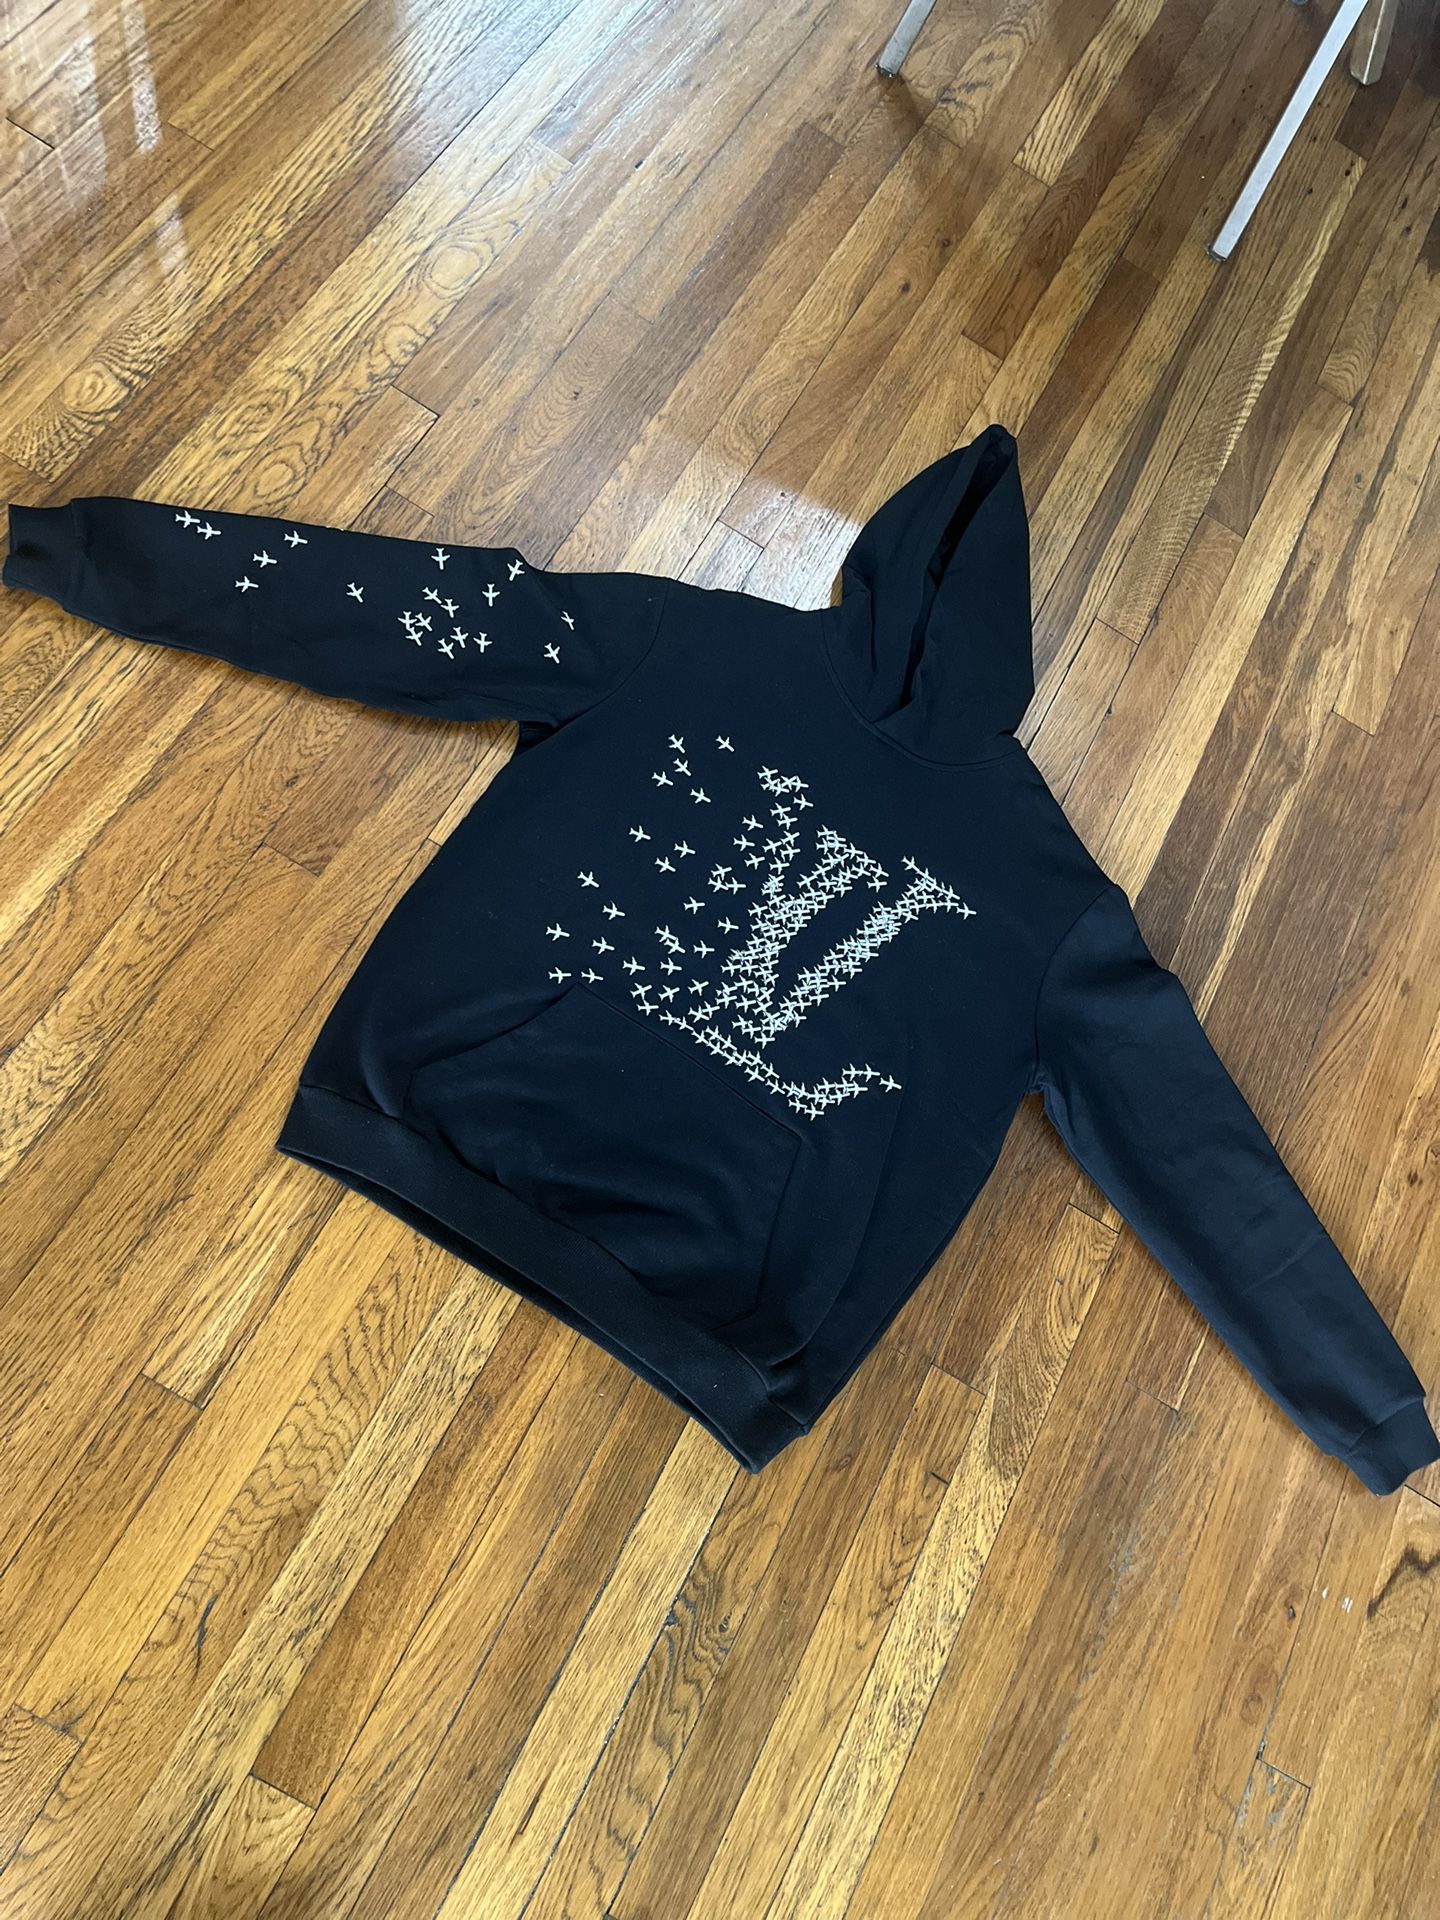 LV Planes Hoodie Size L/XL for Sale in Chicago, IL - OfferUp